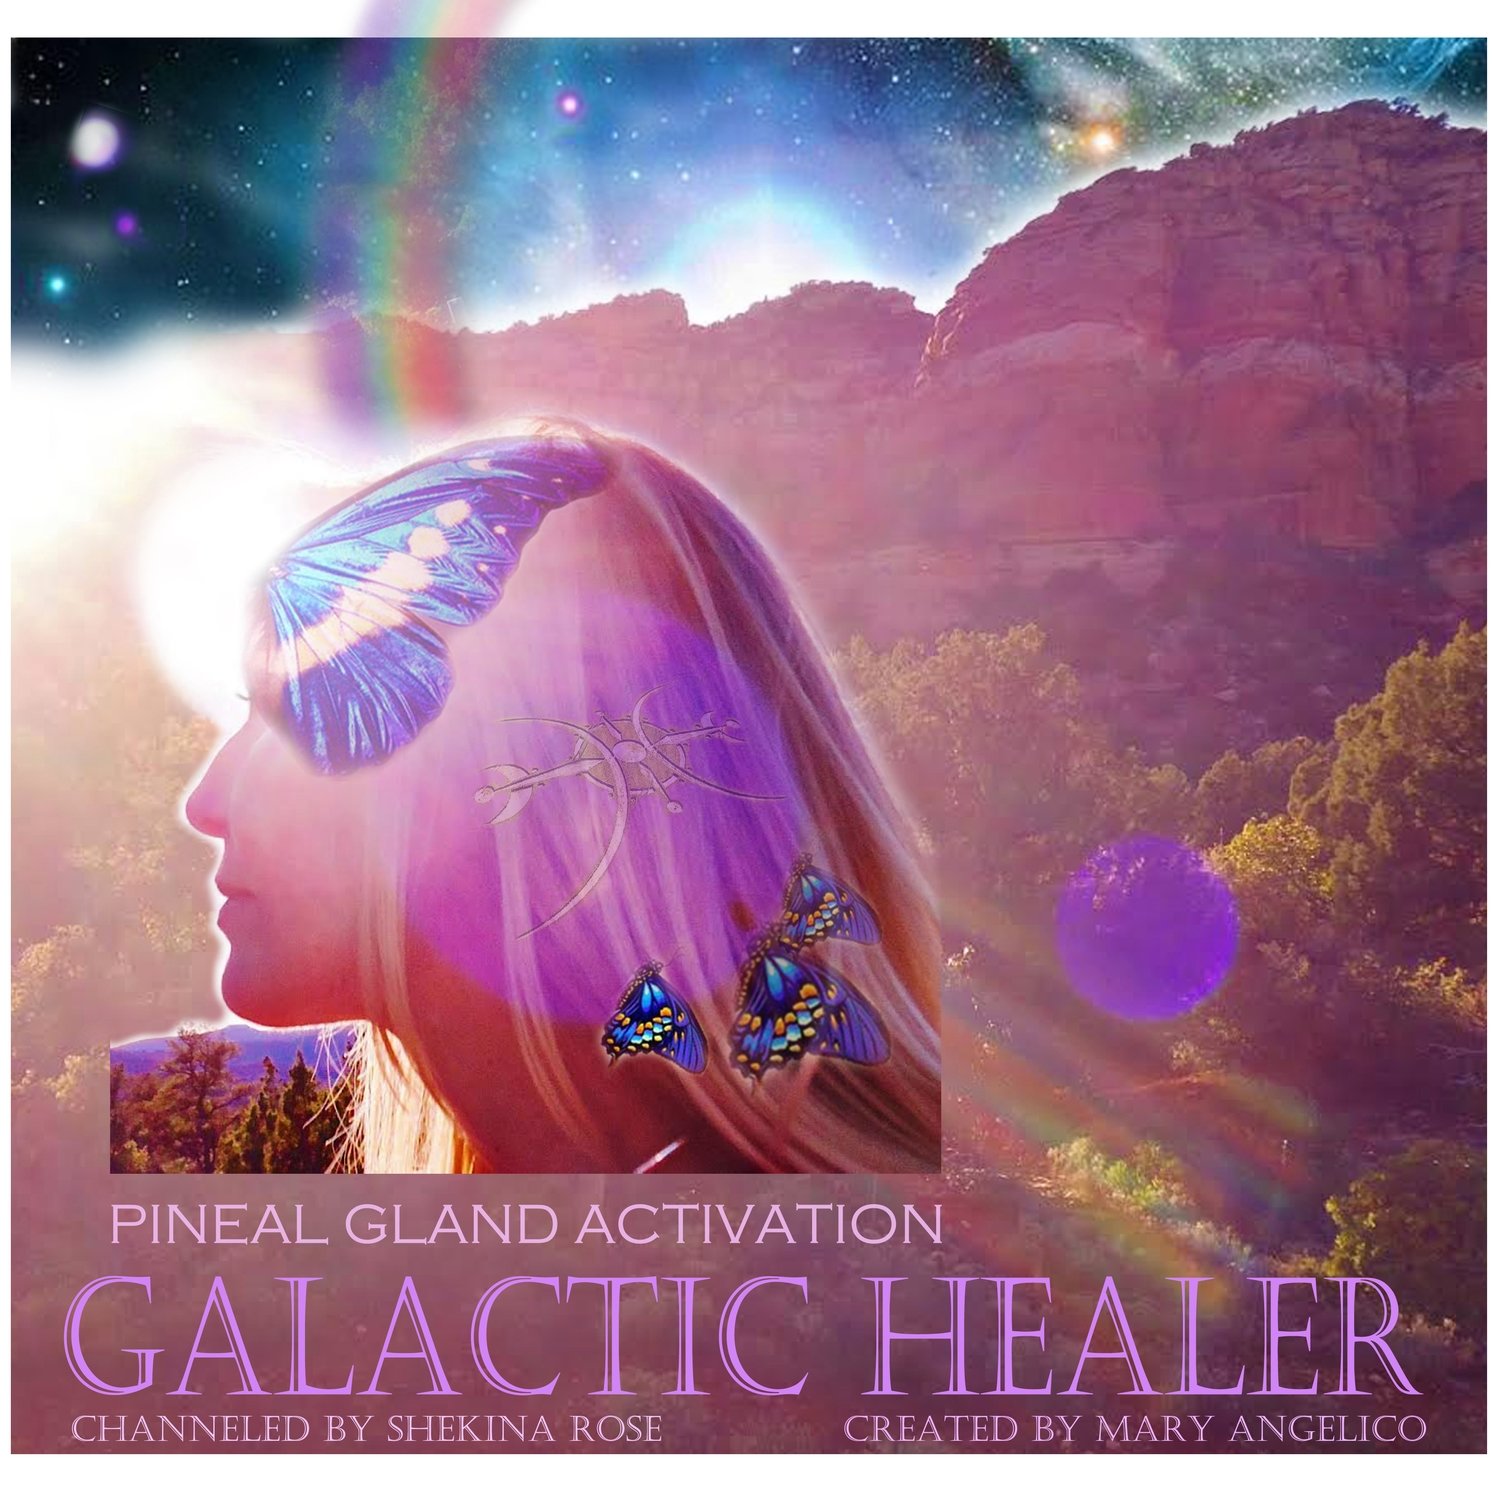 Pineal Gland 3rd Eye Stargate Activation and Galactic Healer/Spiritual retreat Sale/$20.00/$55.00